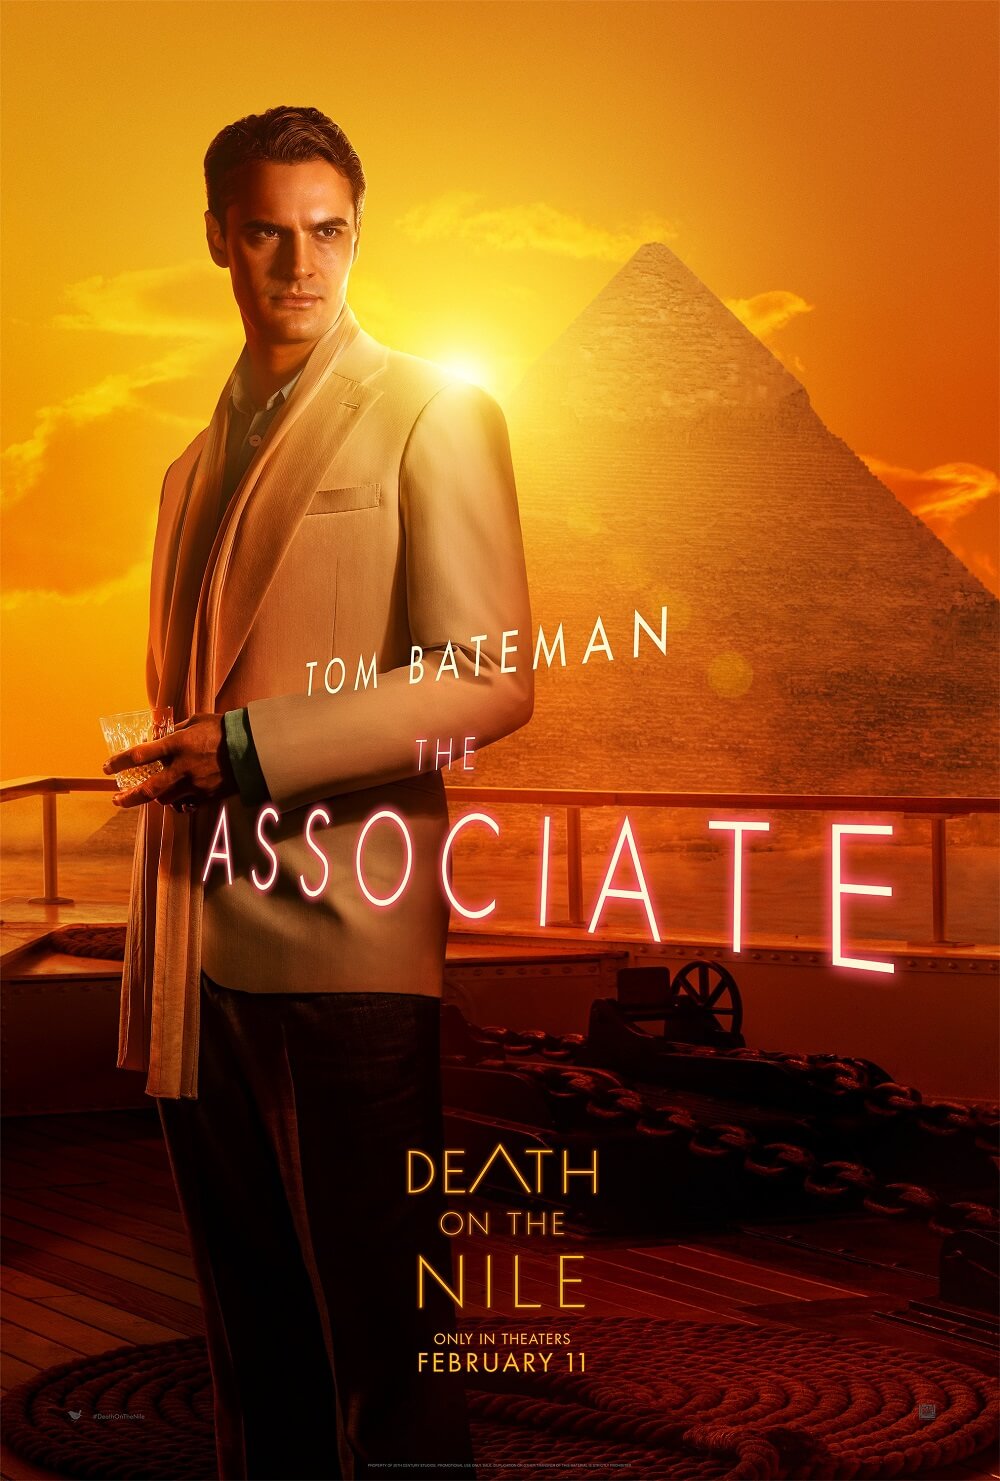 Death on the Nile released character posters passengers prepare to board the ship-5